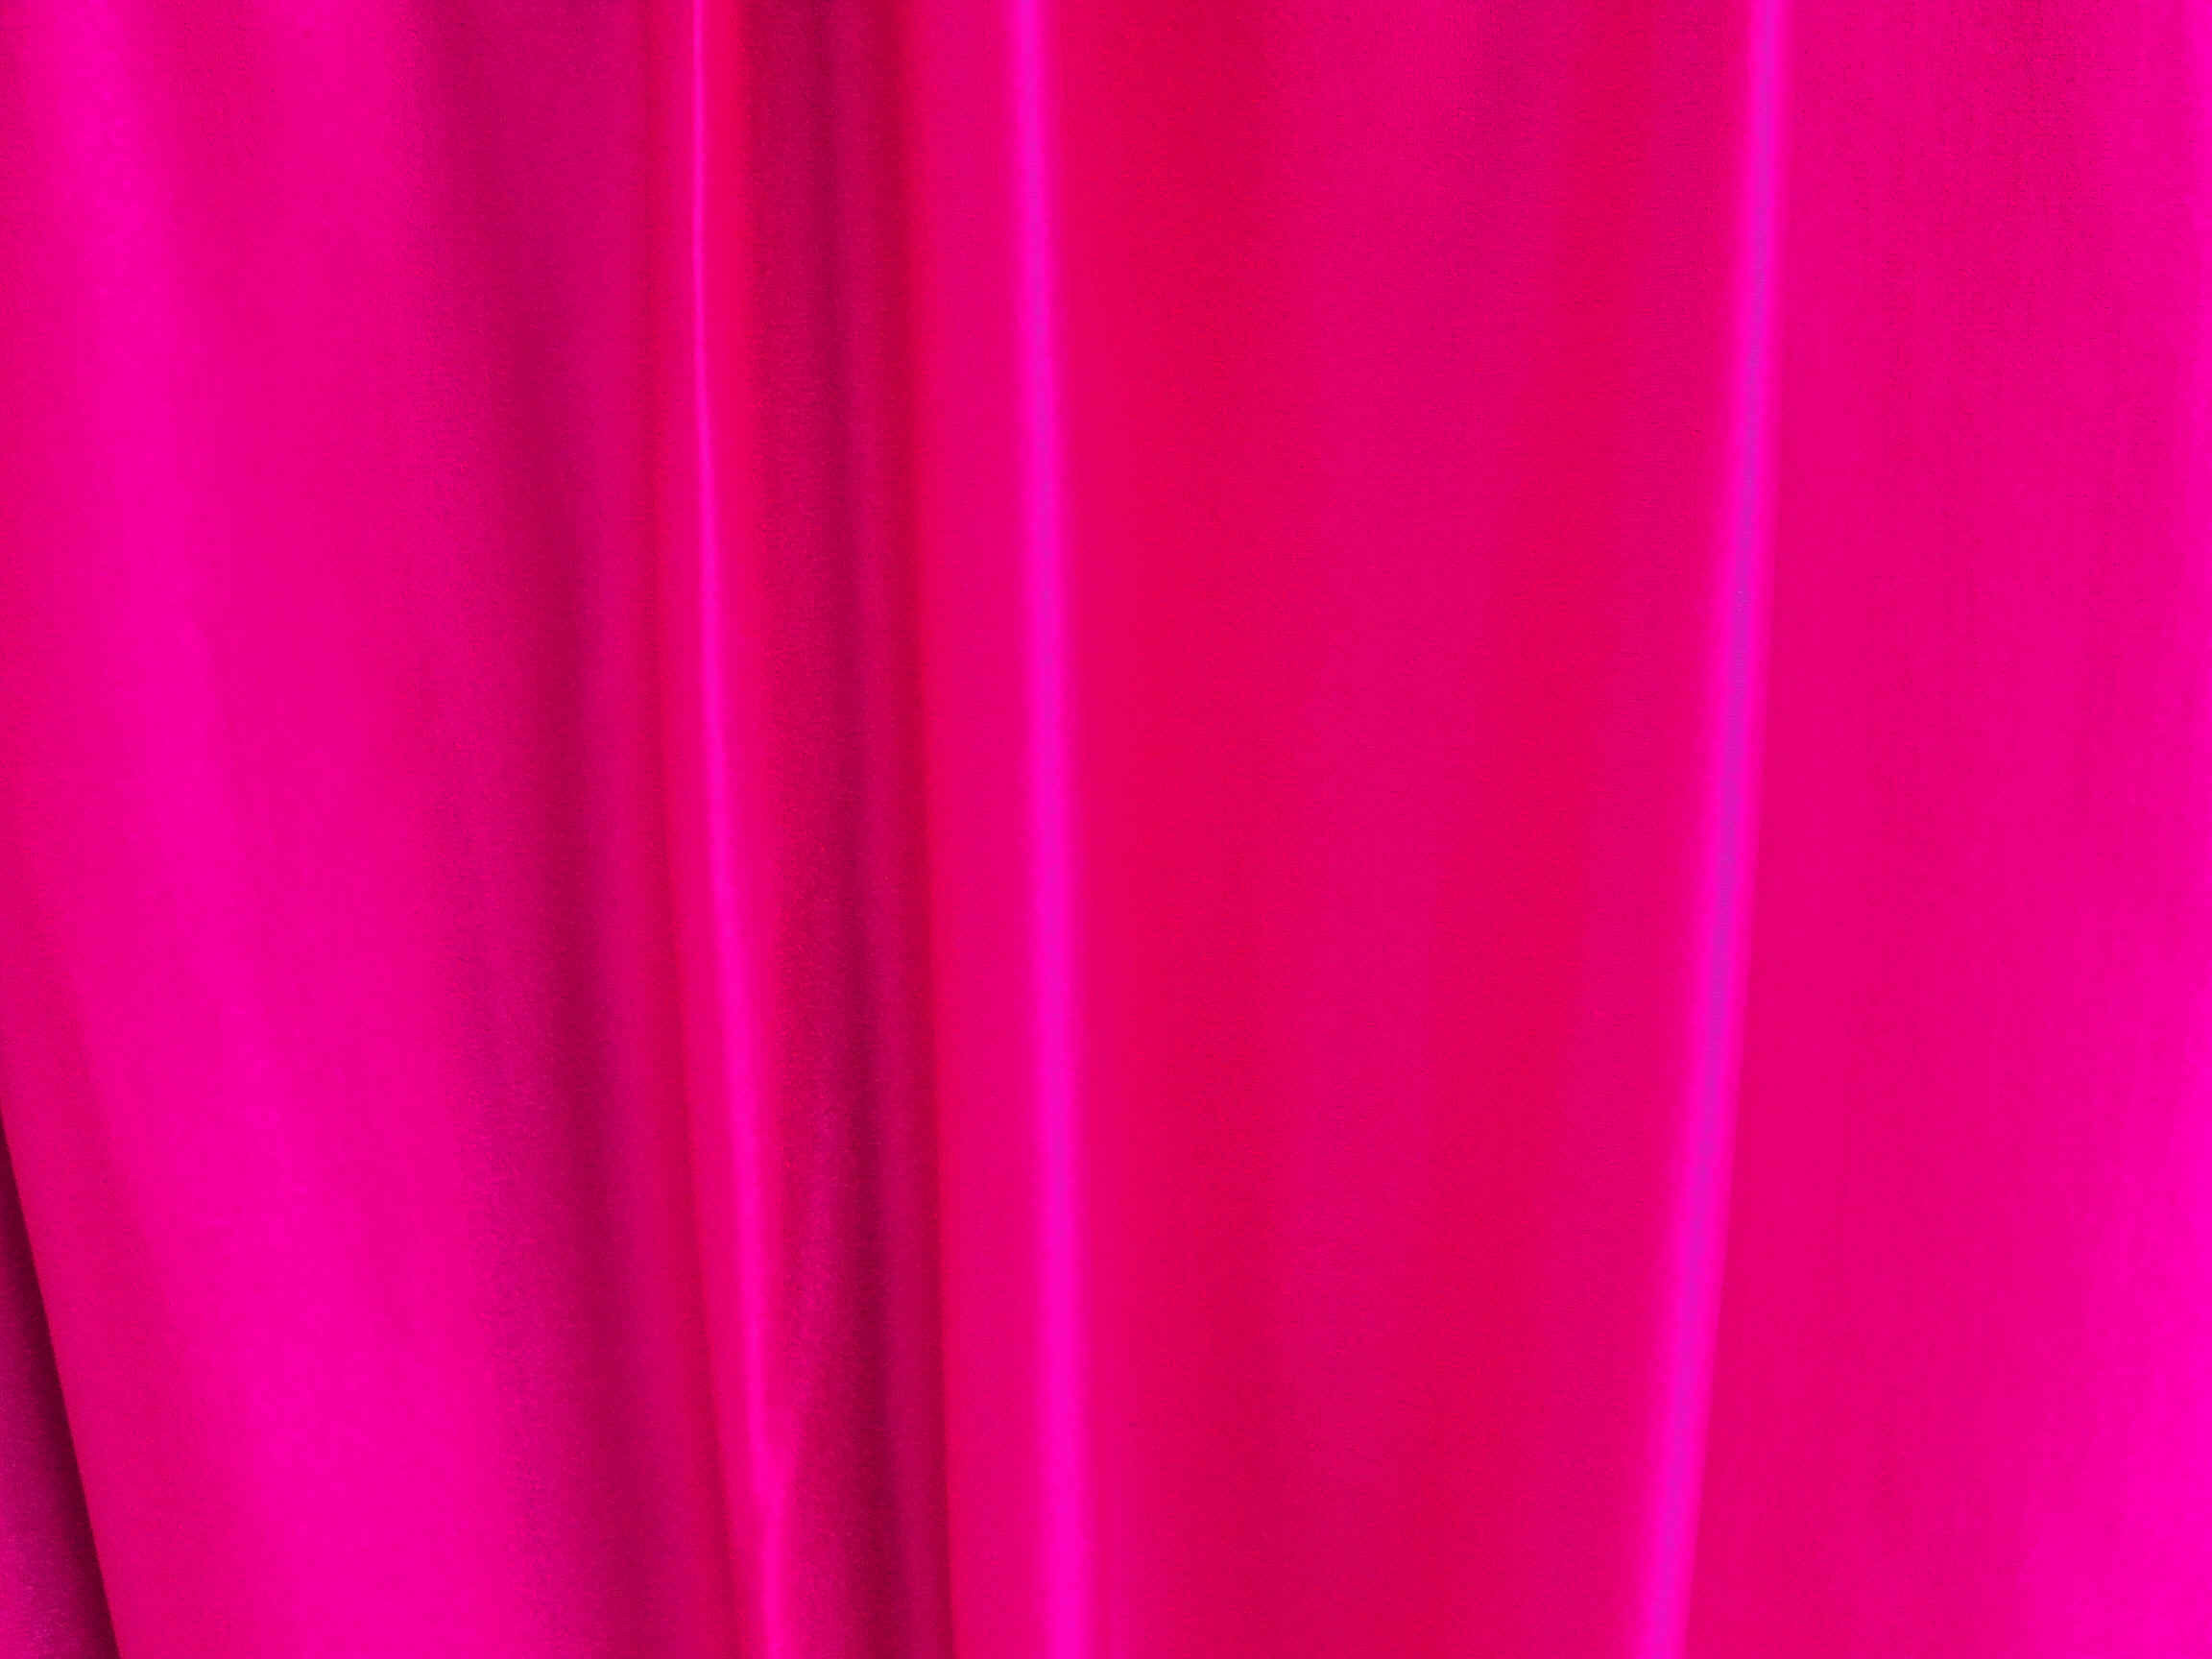 2304x1728 ... Complementary Color To Pink Wonderful Hot Pink Wallpaper 3 Free Hd  Wallpaper Hdblackwallpaper ...